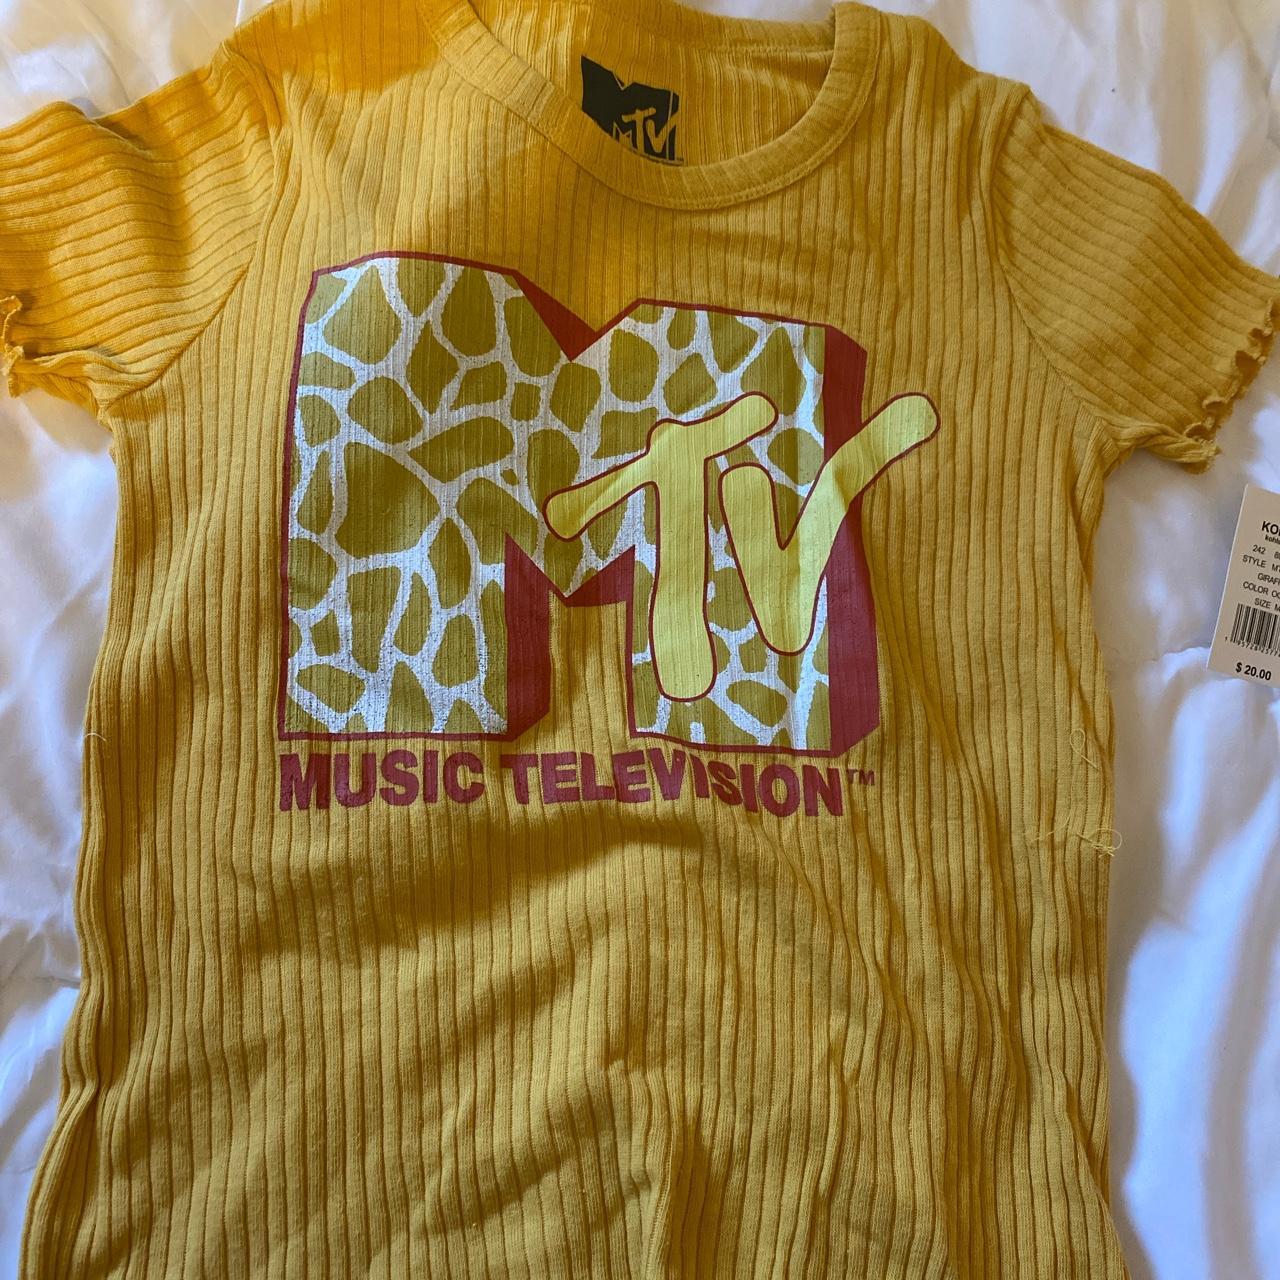 Brand new with tags mtv shirt yellow and cute back... - Depop